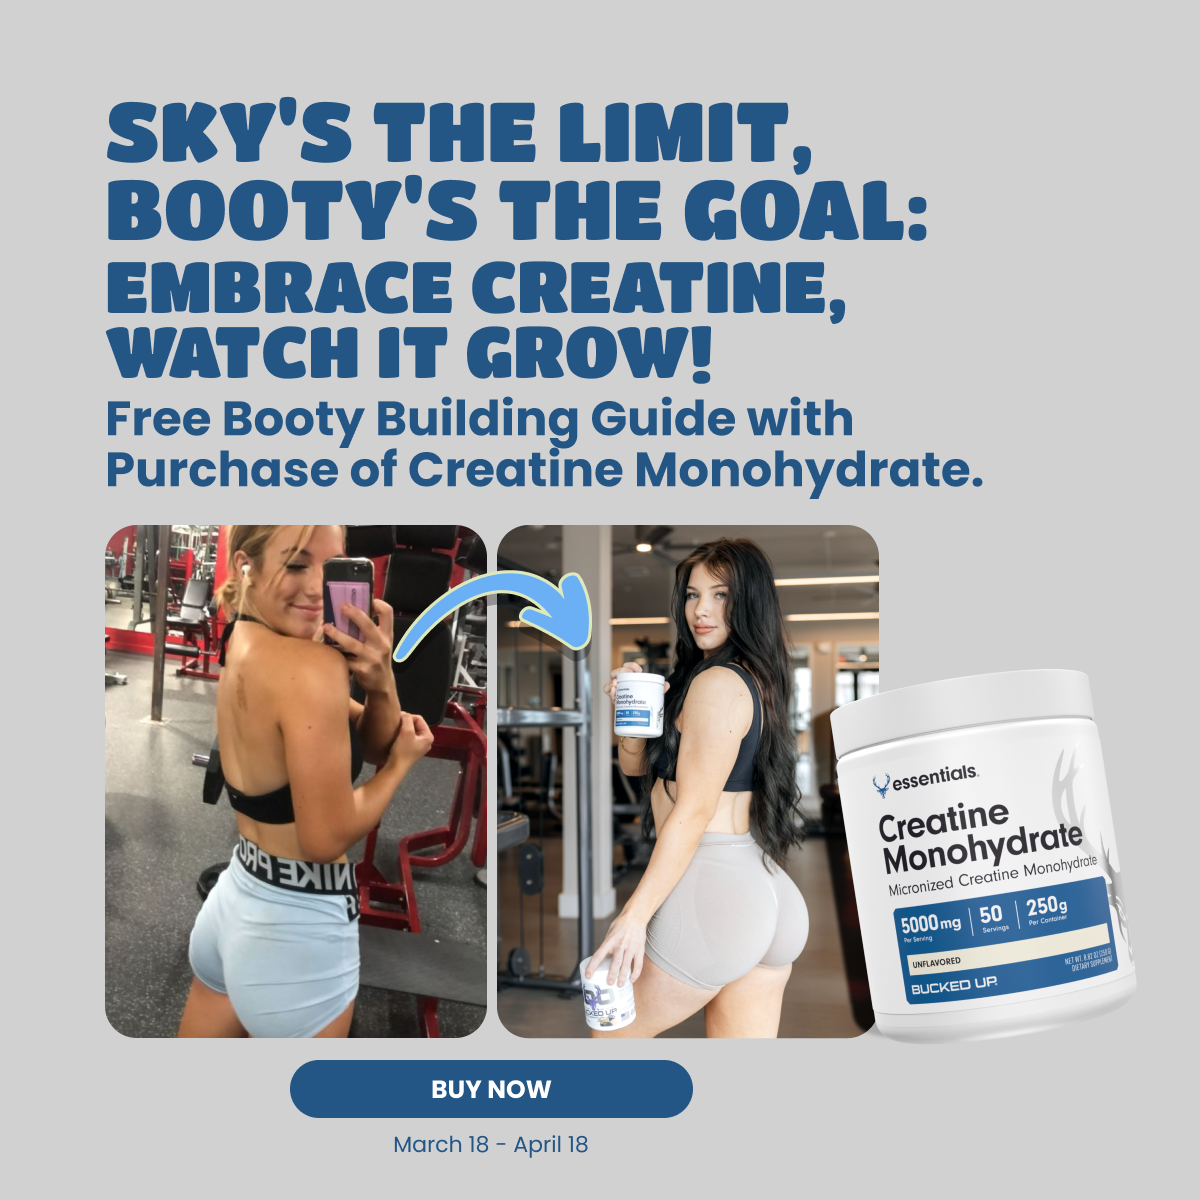 Creatine Promo (Free Booty Guide with Purchase of Creatine) - Text says "Sky's the limit, booty's the goal: Embrace Creatine, Watch it Grow!" and "Free Booty Building Guide with Purchase of Creatine Monohydrate." The button says "